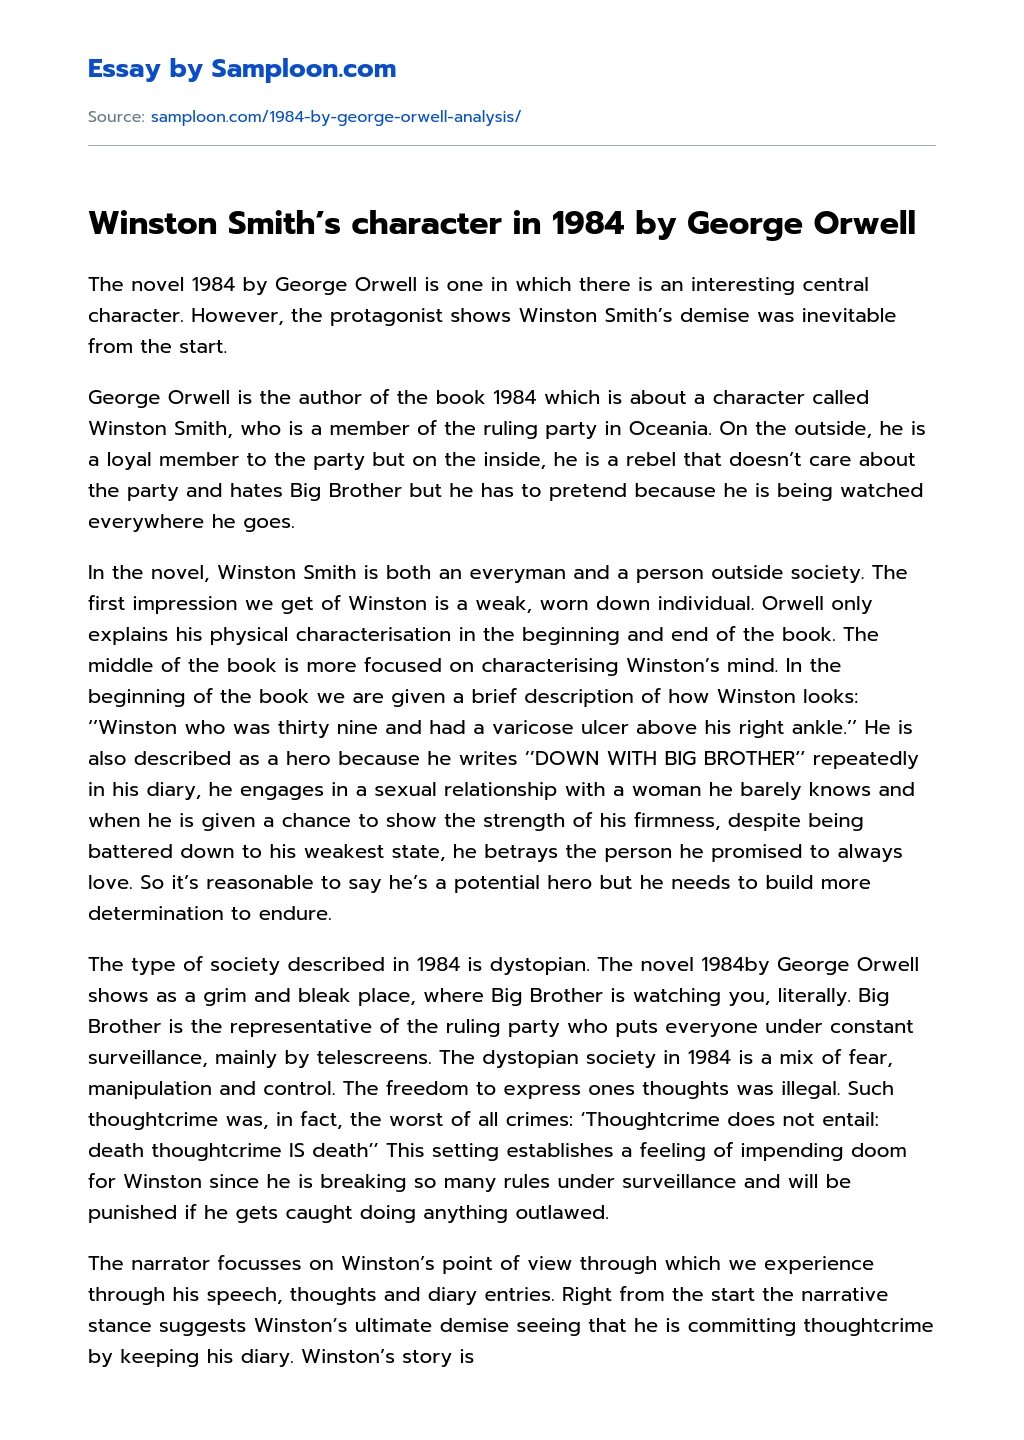 Winston Smith’s character in 1984 by George Orwell Literary Analysis essay